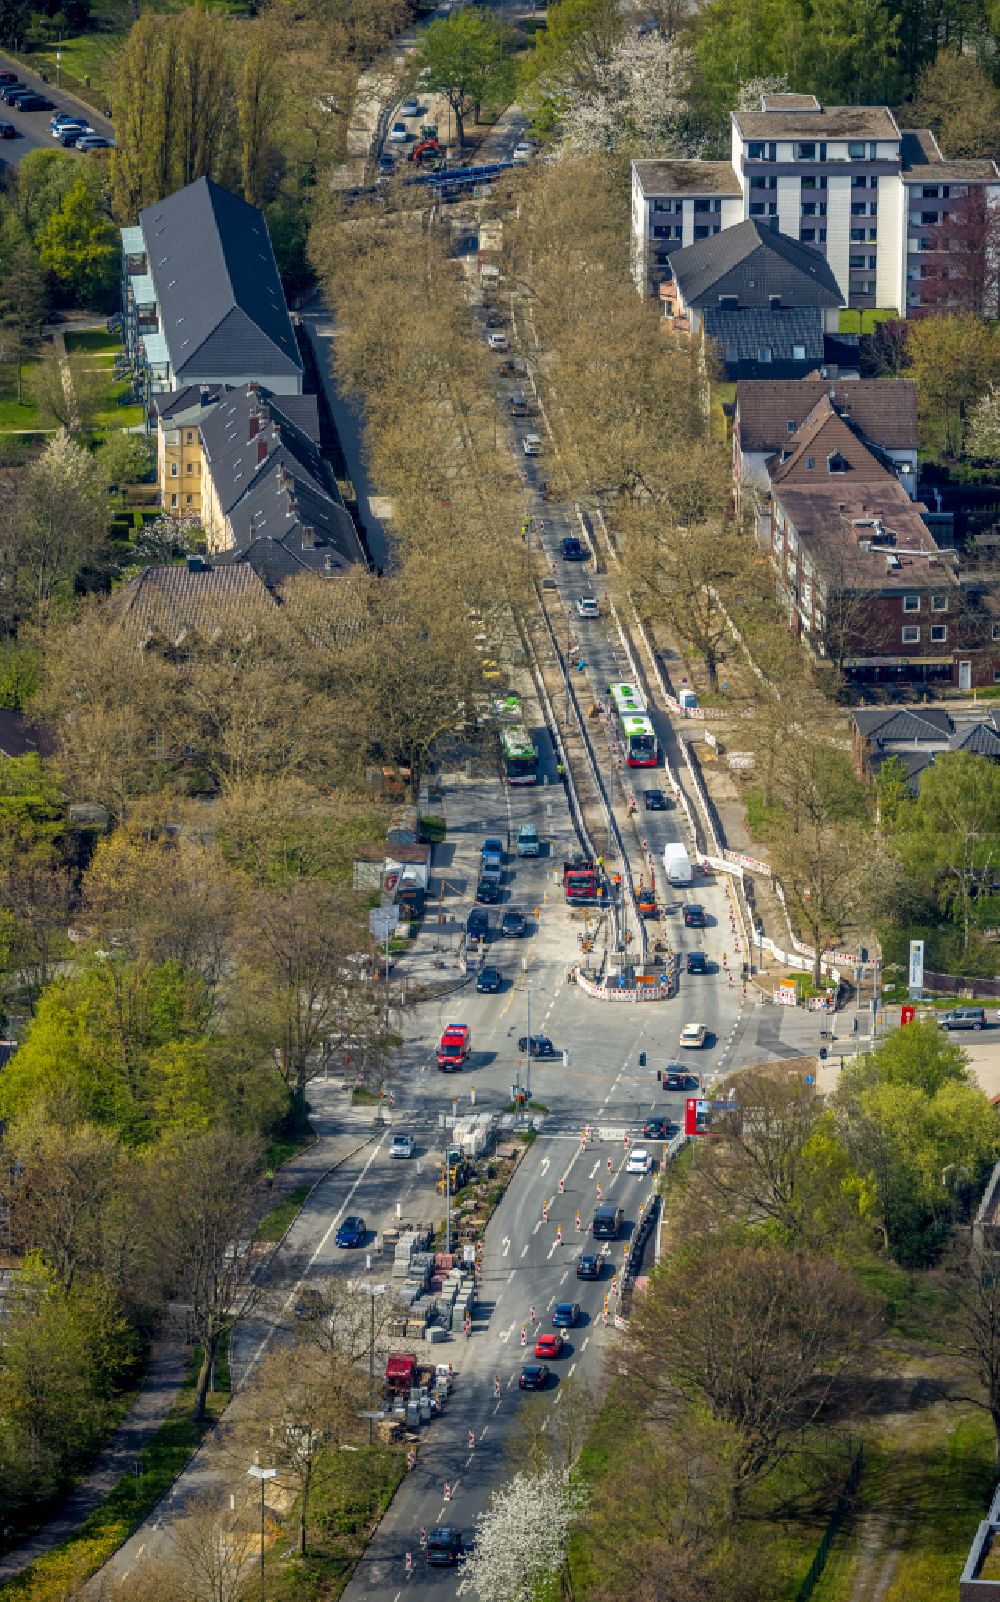 Aerial image Wiemelhausen - Construction site for the new construction of a cycle path on the street Koenigsallee in Wiemelhausen in the Ruhr area in the state of North Rhine-Westphalia, Germany